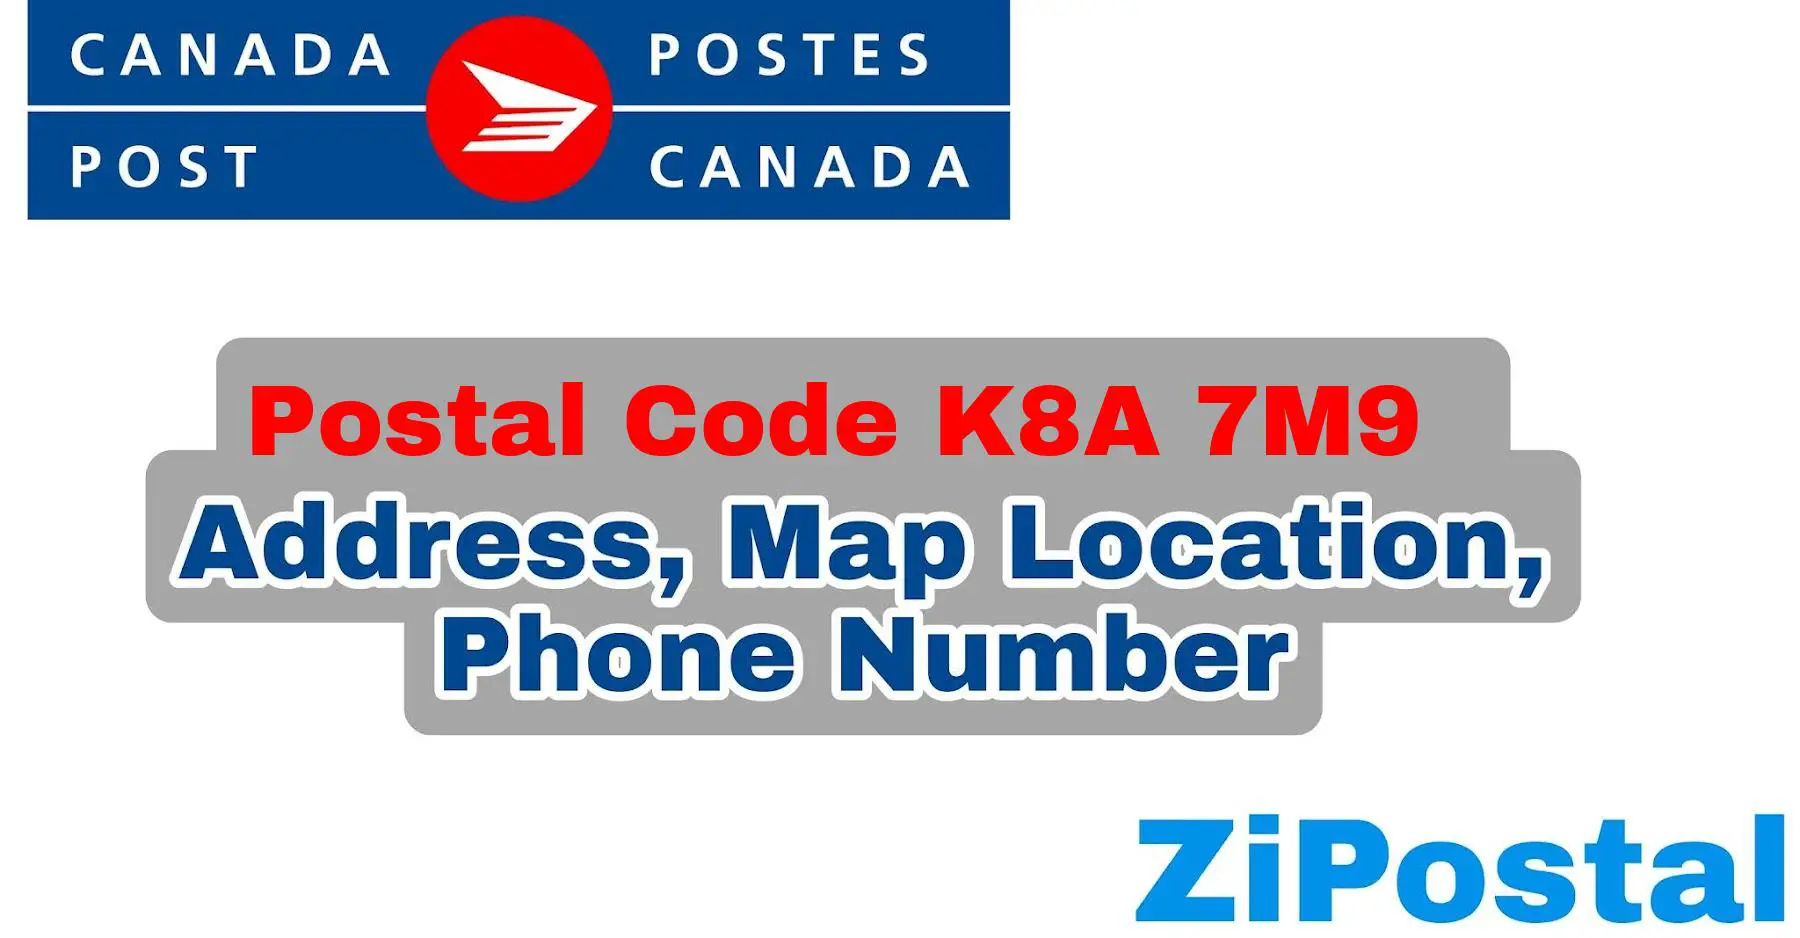 Postal Code K8A 7M9 Address Map Location and Phone Number